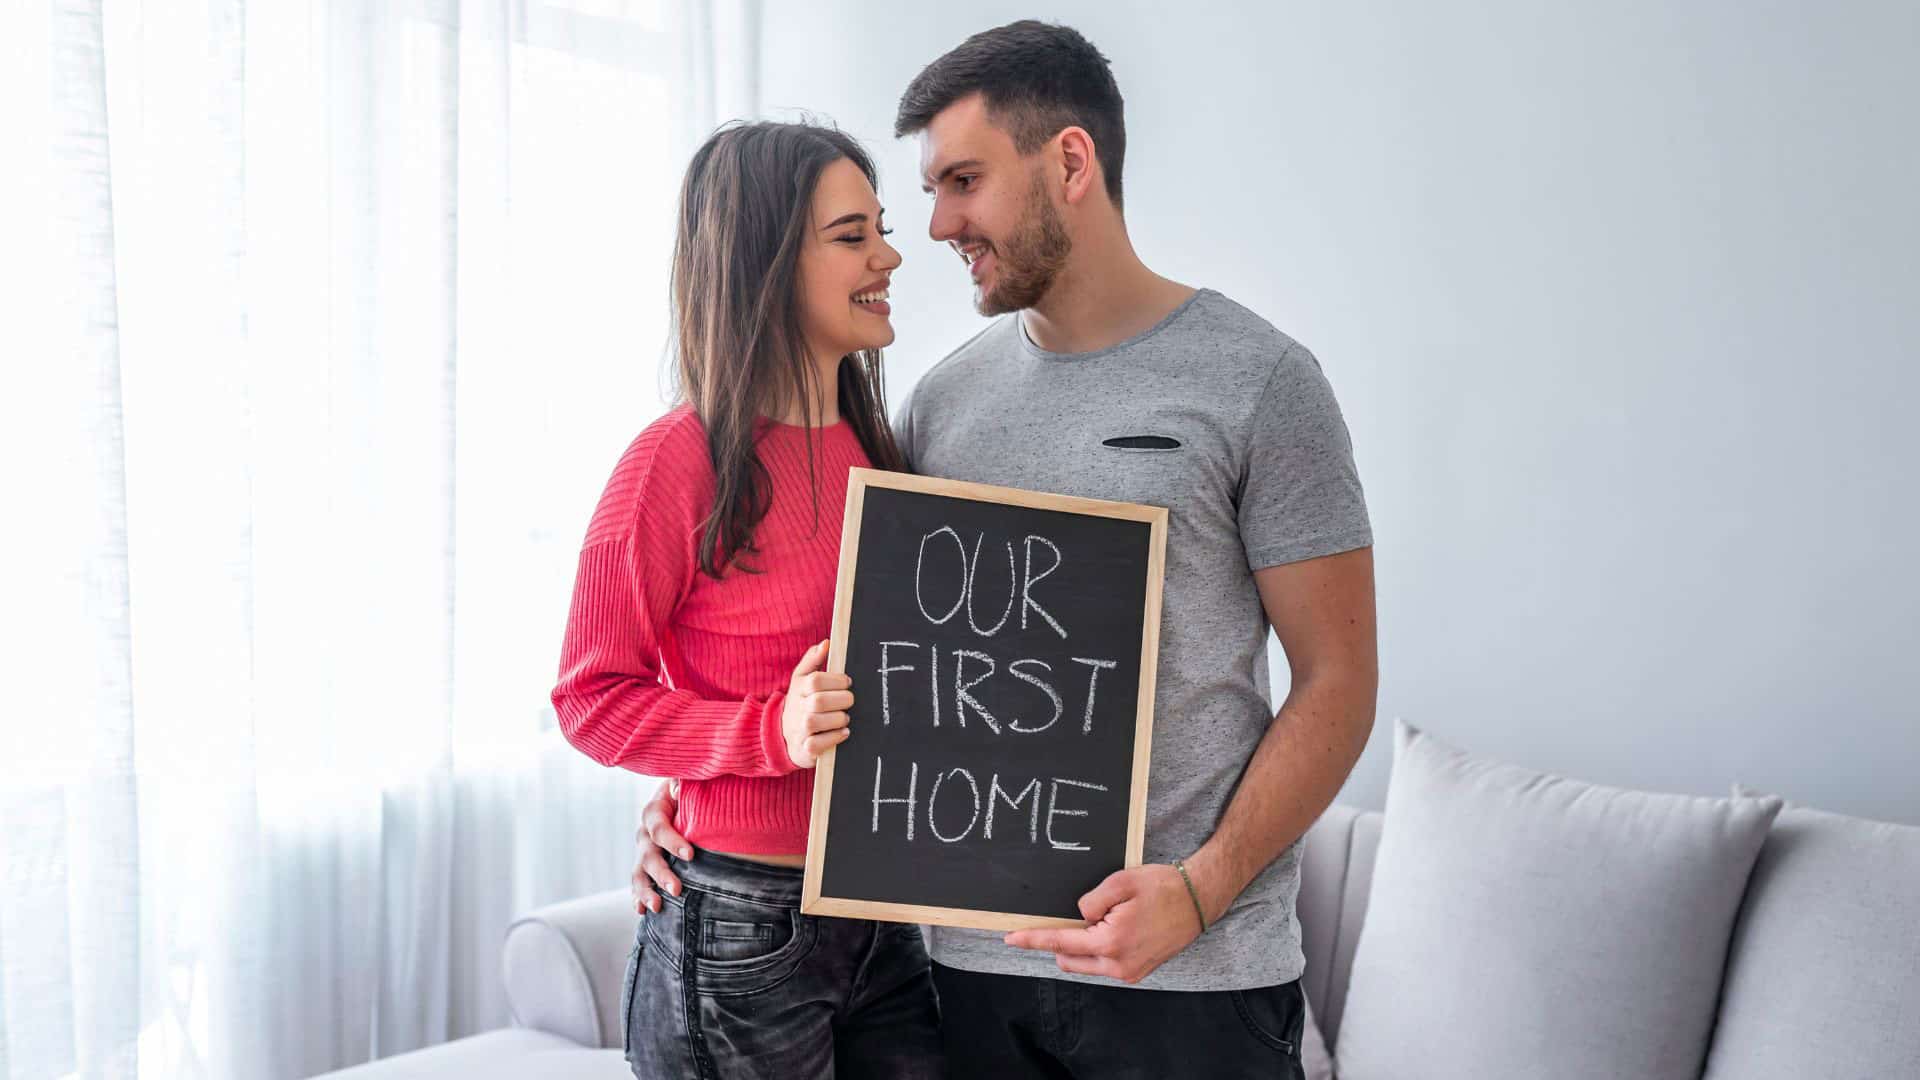 first time home buyers with a sign that says “our first home”